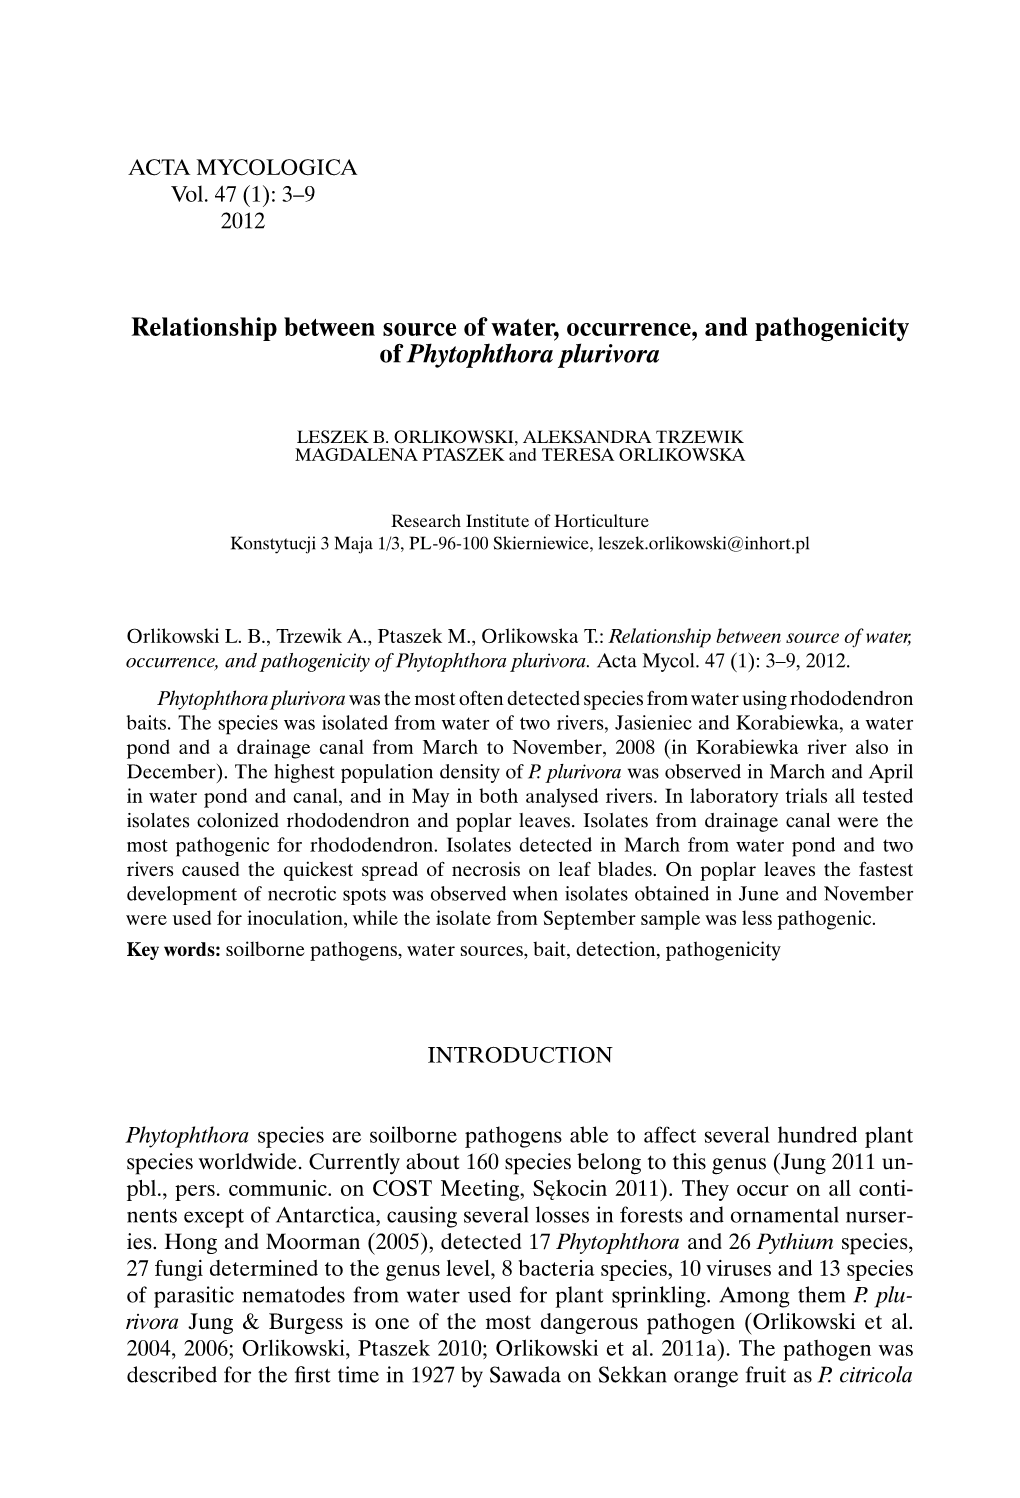 Relationship Between Source of Water, Occurrence, and Pathogenicity of Phytophthora Plurivora